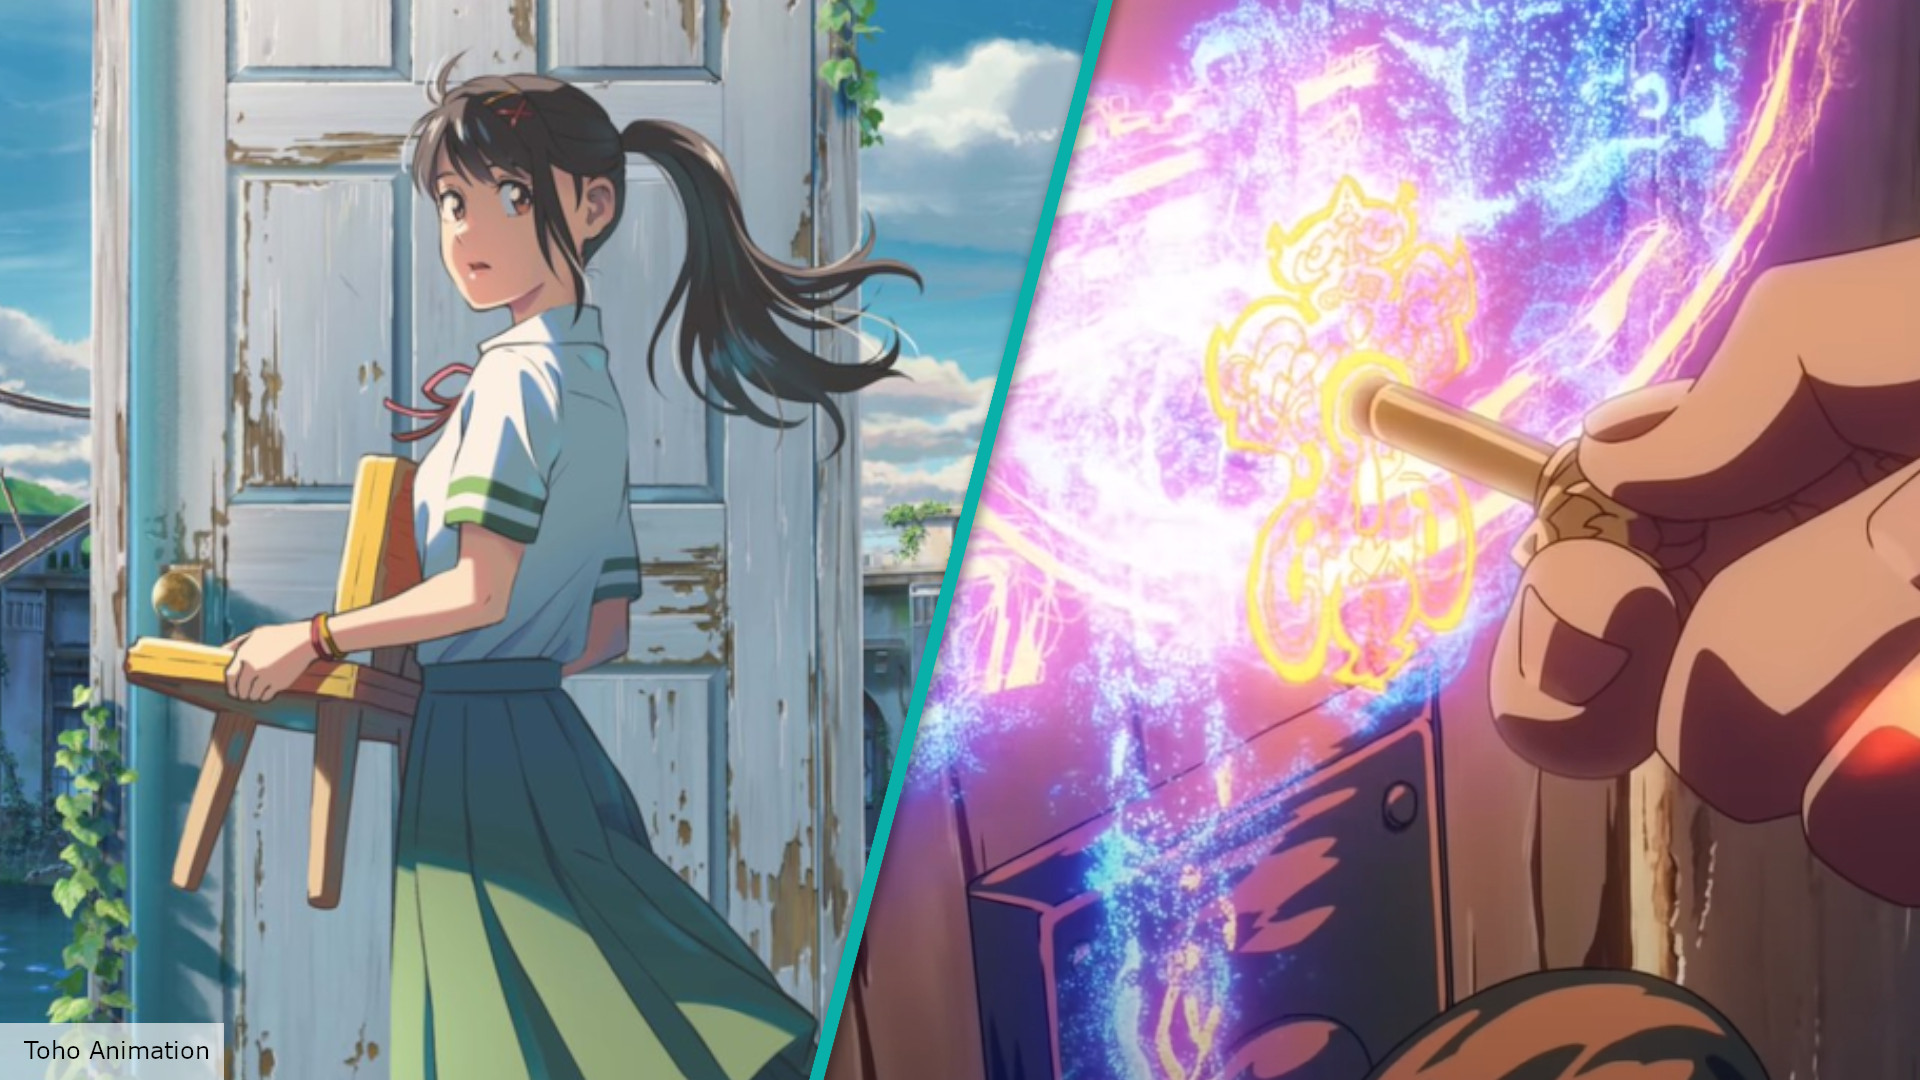 New Japanese anime movie from Sailor Moon maker coming to Netflix